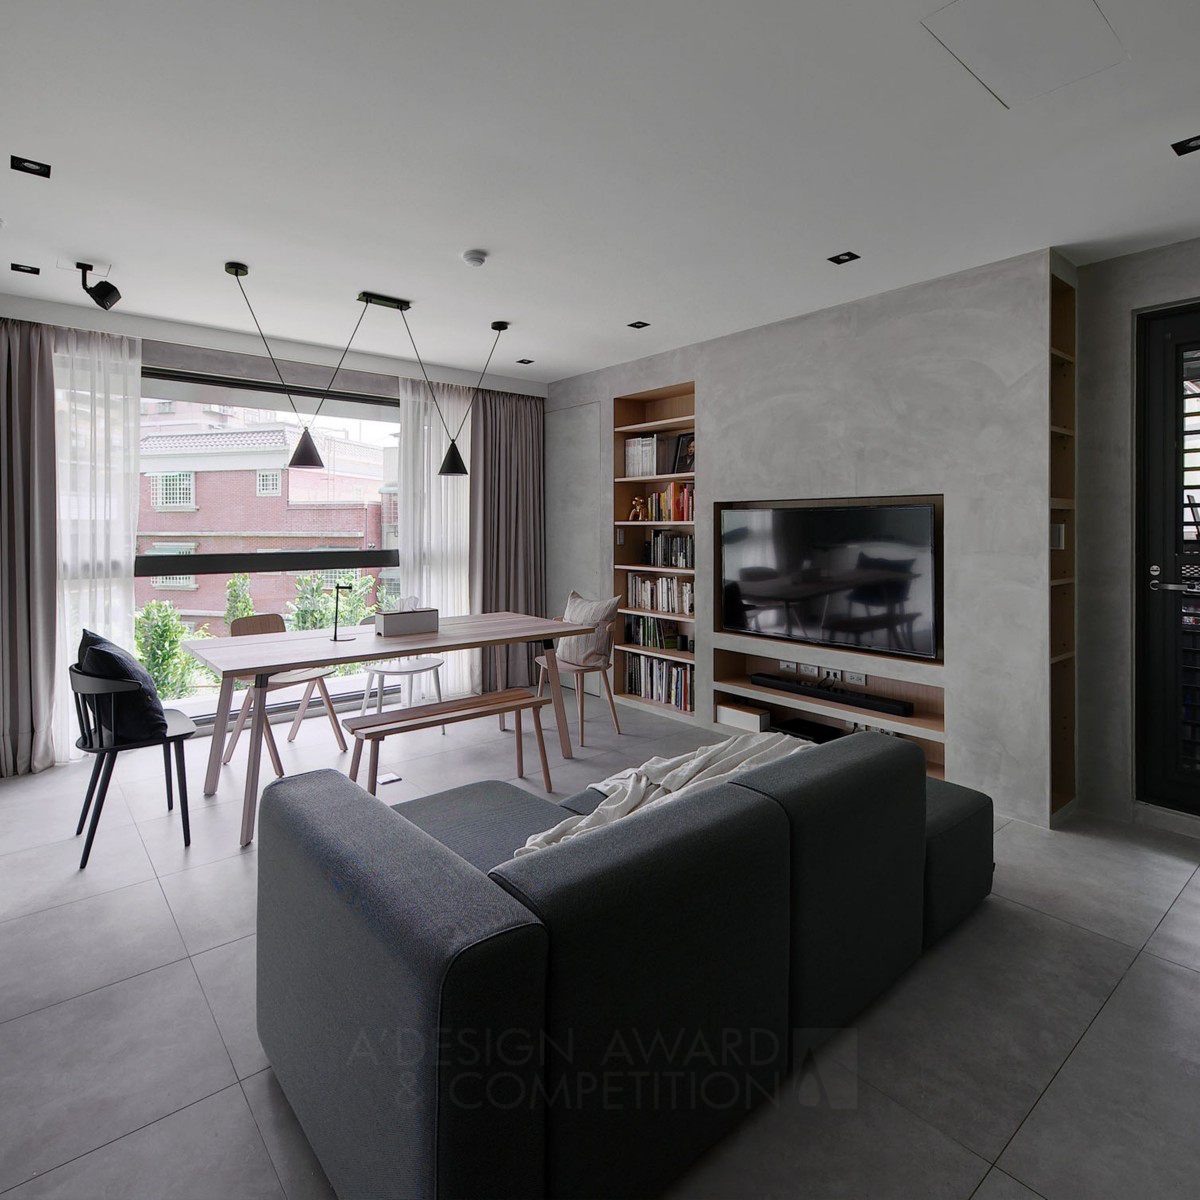 About Enframed Residential House by Yi-Hsiang Cheng